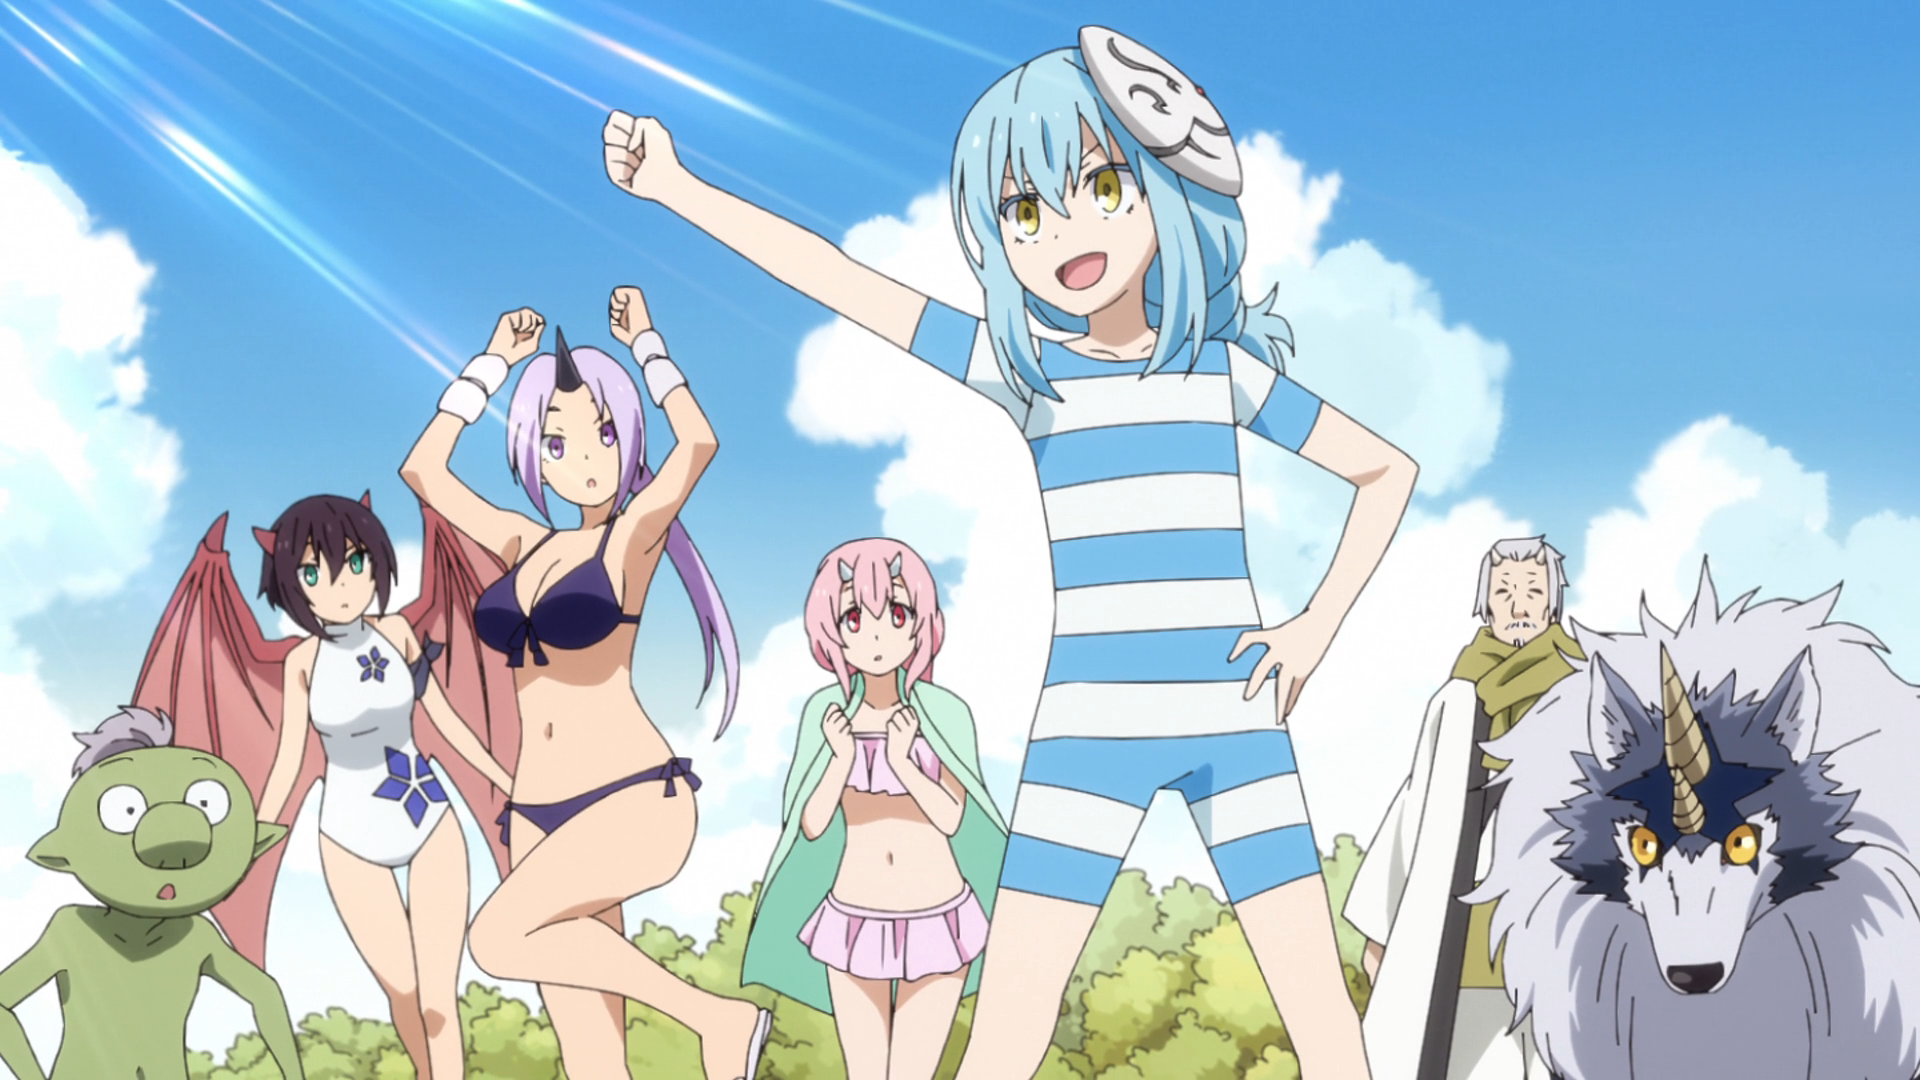 Crunchyroll - RECS: The 5 Best Anime To Watch If You Love That Time I Got  Reincarnated as a Slime